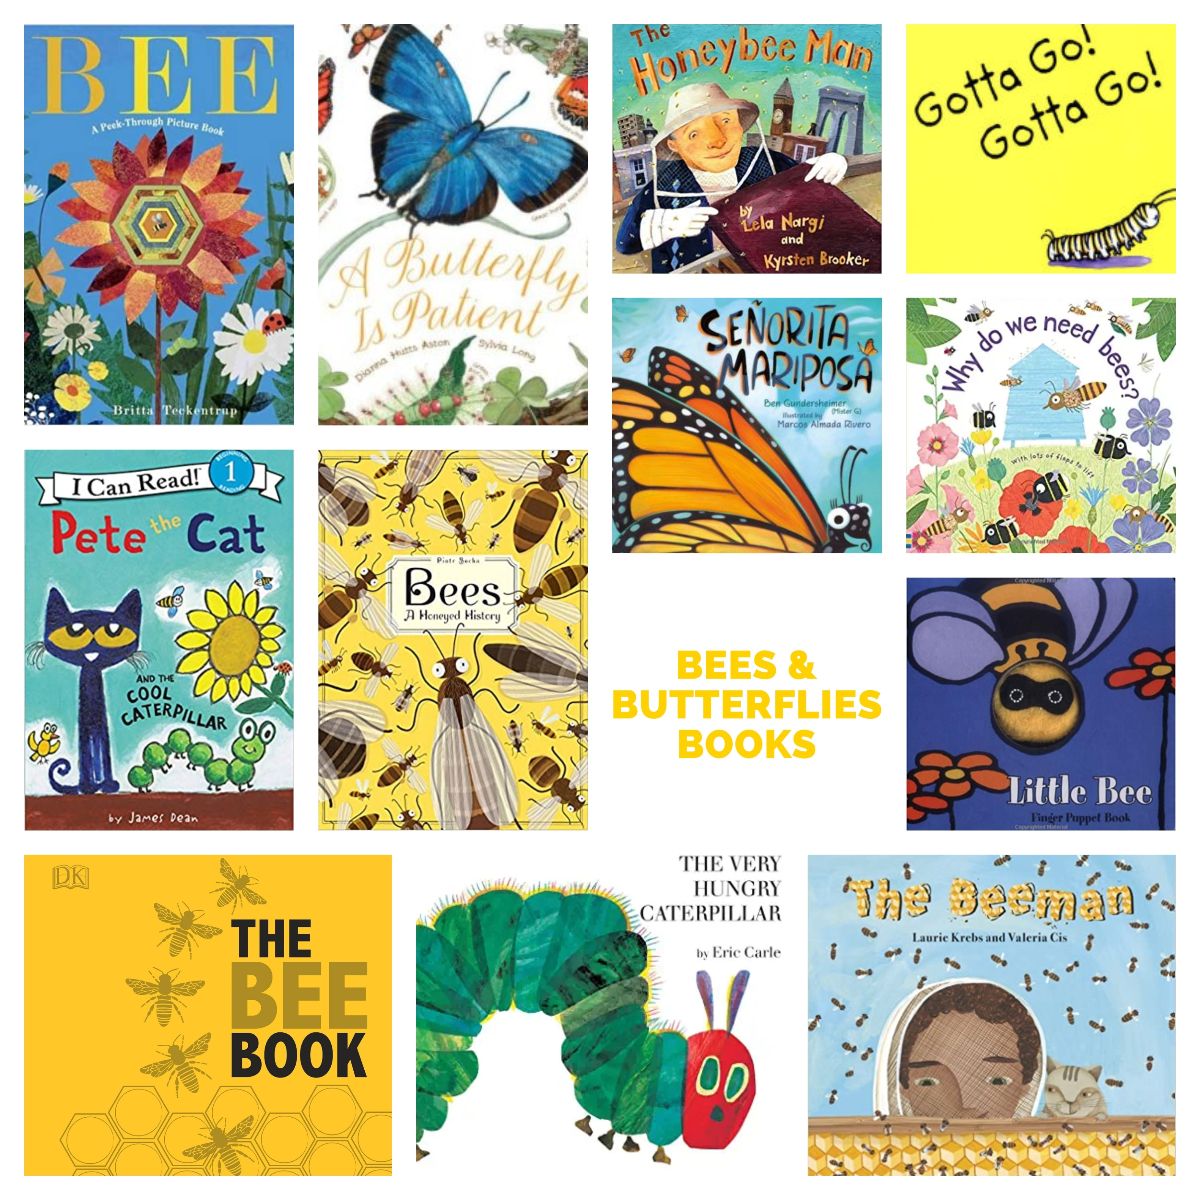 Bees and Butterflies Books